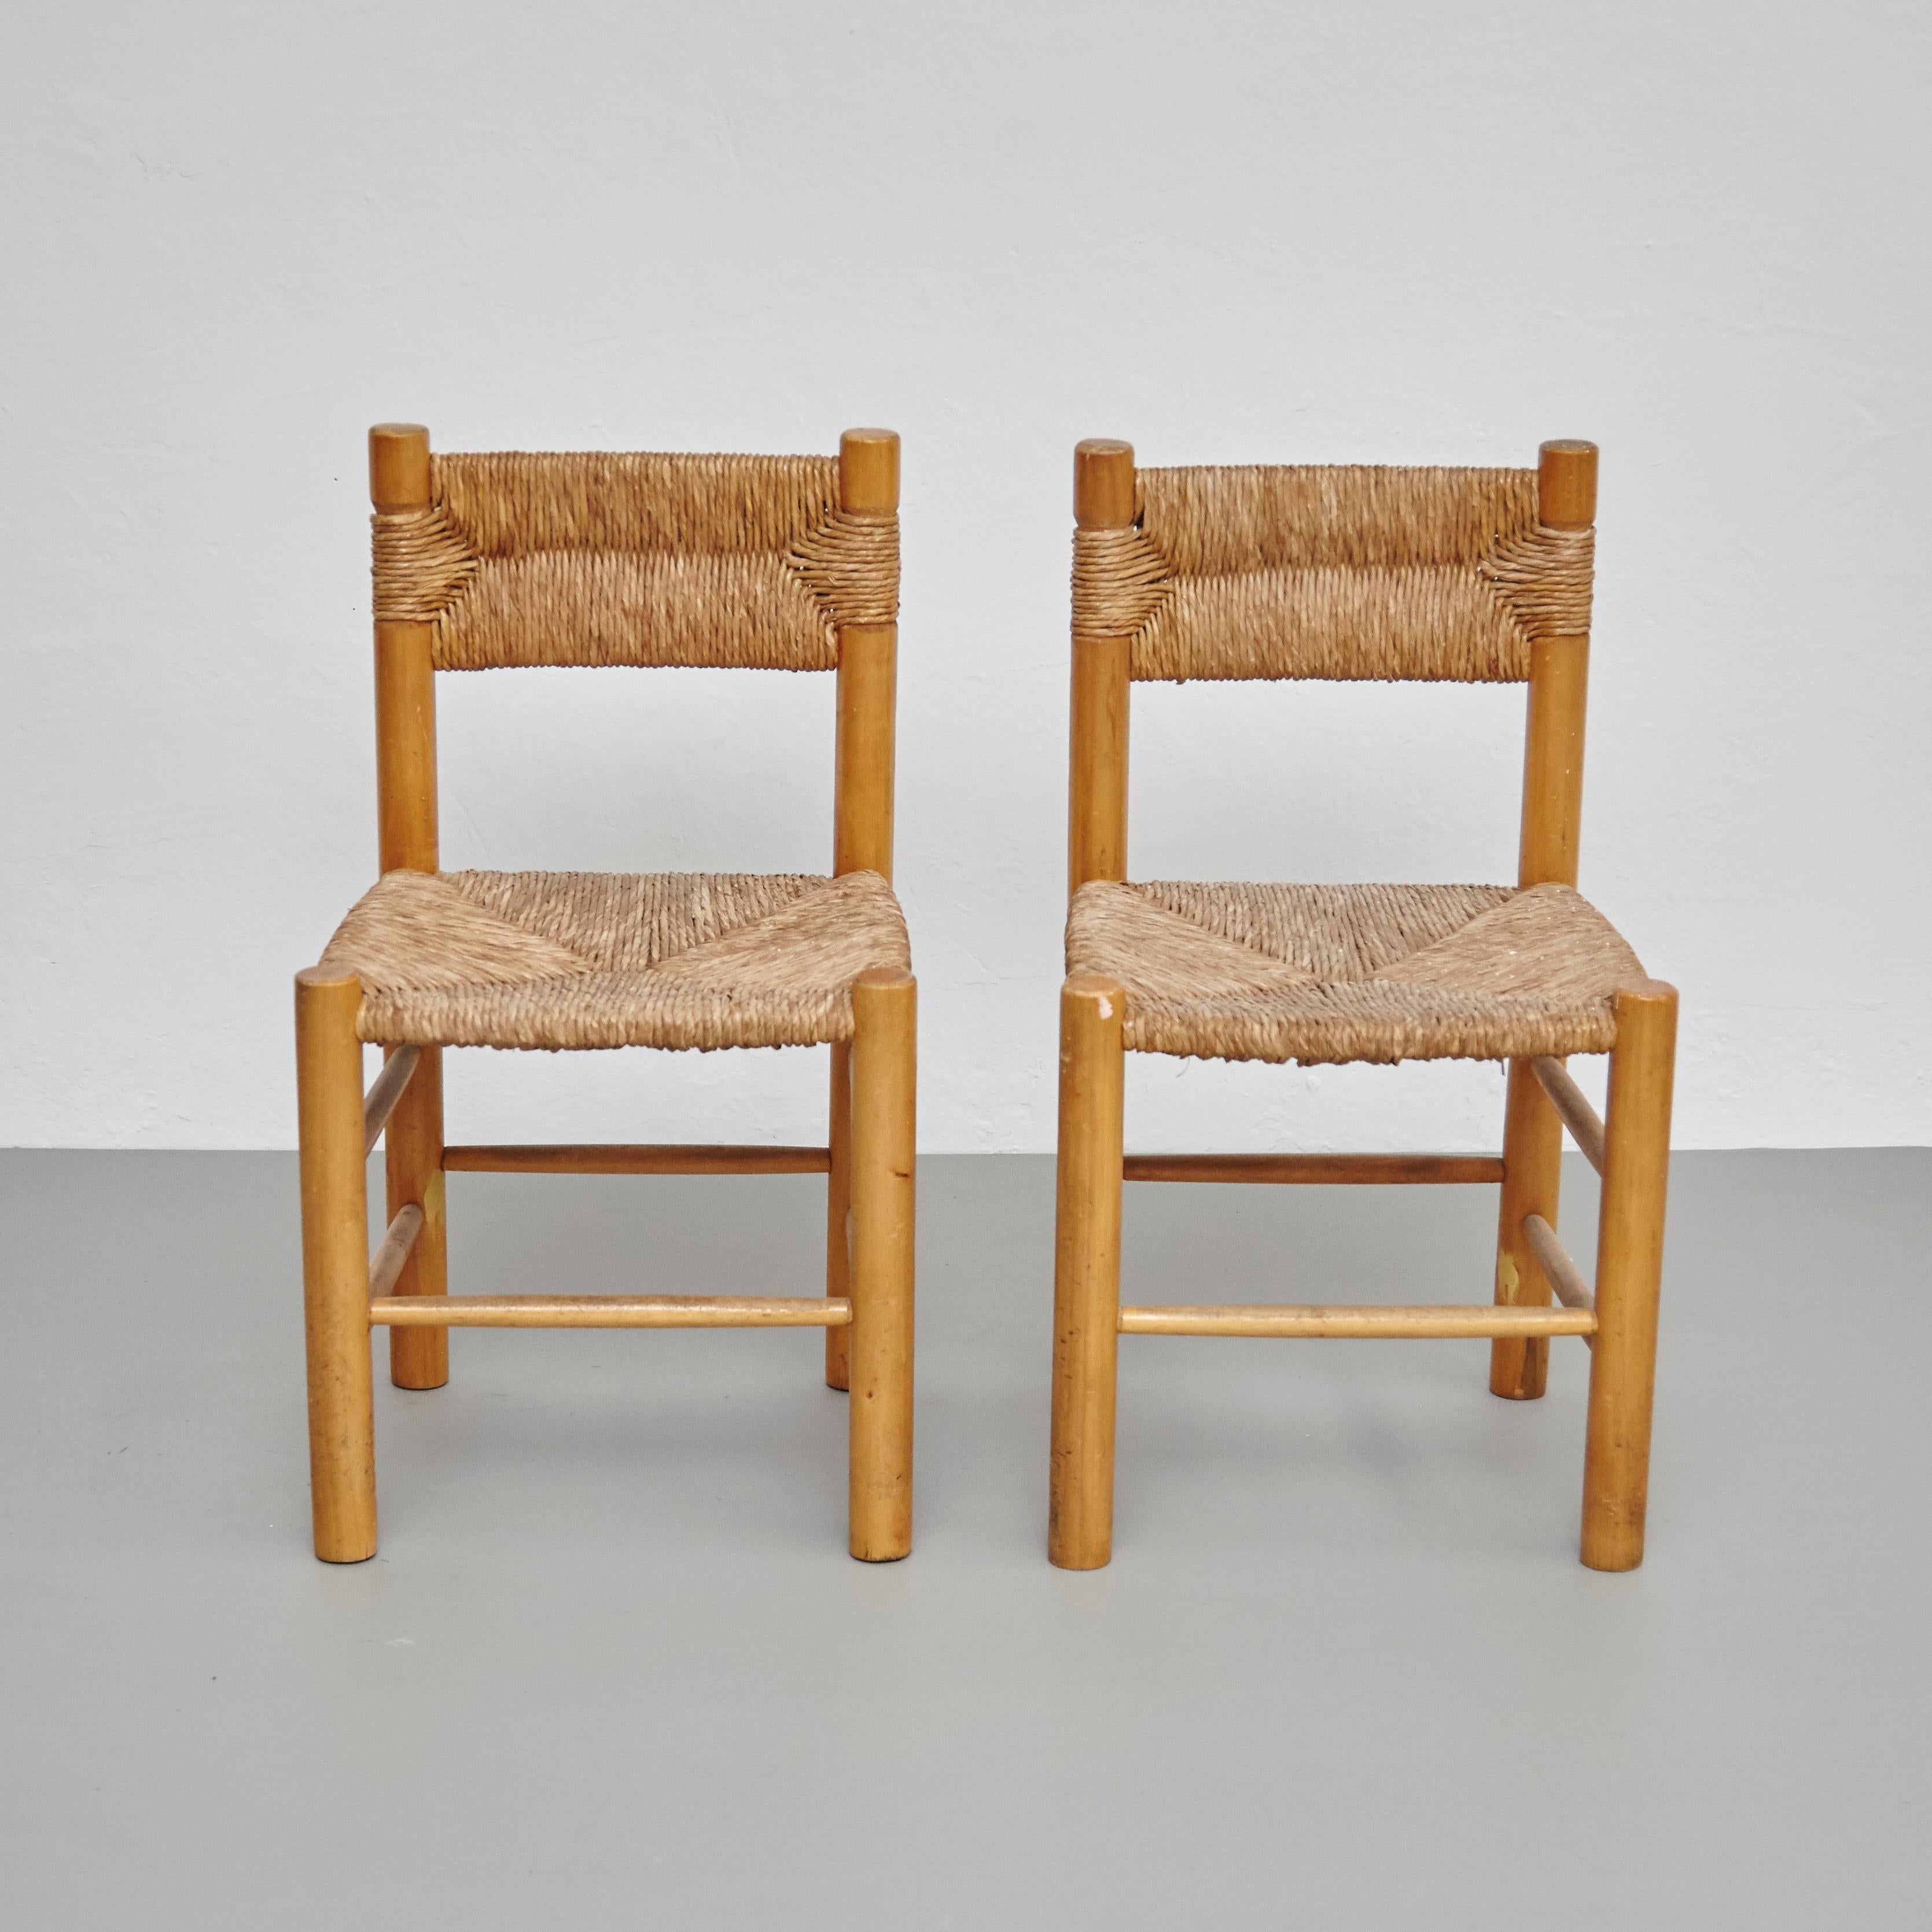 French After Charlotte Perriand Mid-Century Modern Rattan Pair of Chairs, circa 1950